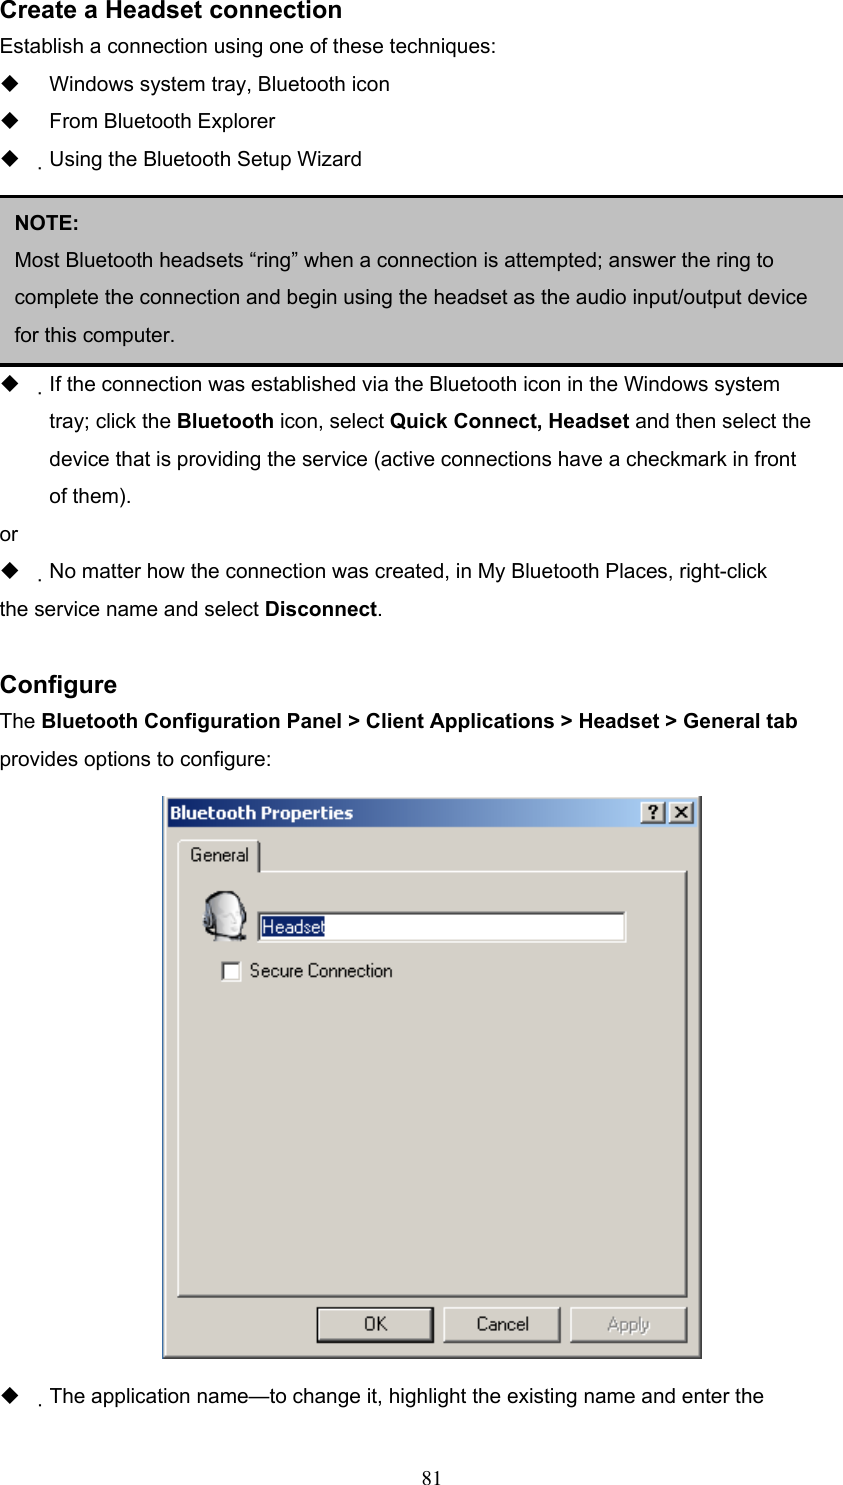 Create a Headset connection Establish a connection using one of these techniques:   Windows system tray, Bluetooth icon   From Bluetooth Explorer   Using the Bluetooth Setup Wizard     Close a Headset connection   If the connection was established via the Bluetooth icon in the Windows system NOTE:  Most Bluetooth headsets “ring” when a connection is attempted; answer the ring to complete the connection and begin using the headset as the audio input/output device for this computer.   tray; click the Bluetooth icon, select Quick Connect, Headset and then select the device that is providing the service (active connections have a checkmark in front of them). or   No matter how the connection was created, in My Bluetooth Places, right-click the service name and select Disconnect.  Configure The Bluetooth Configuration Panel &gt; Client Applications &gt; Headset &gt; General tab provides options to configure:    The application name—to change it, highlight the existing name and enter the  81 